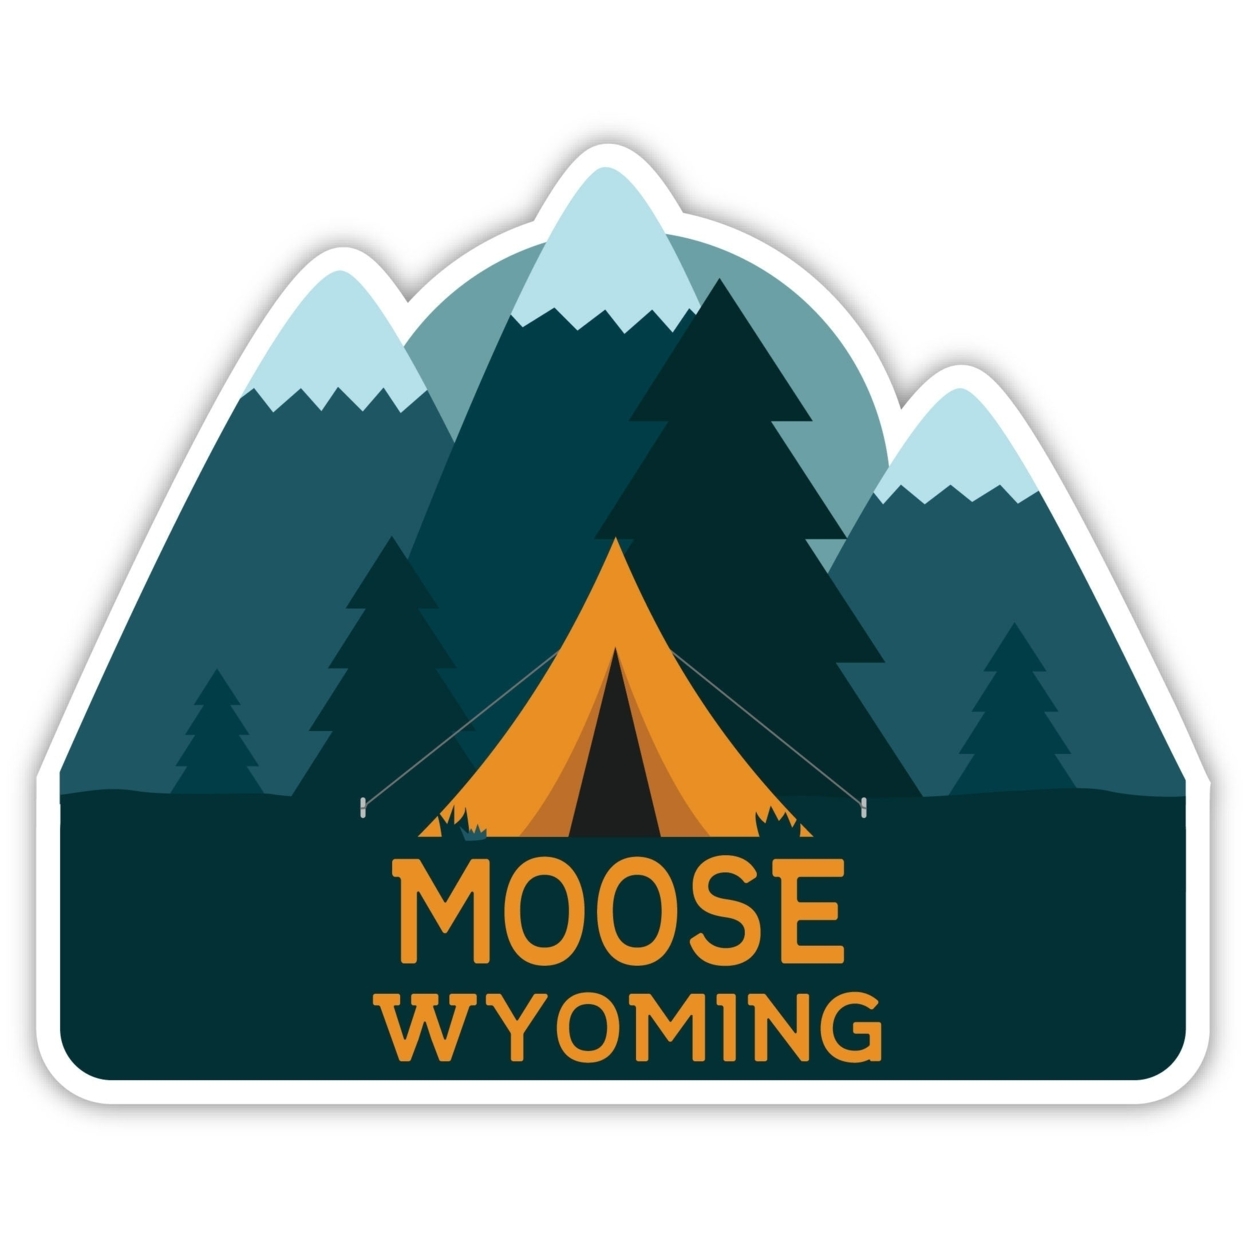 Moose Wyoming Souvenir Decorative Stickers (Choose Theme And Size) - Single Unit, 2-Inch, Tent